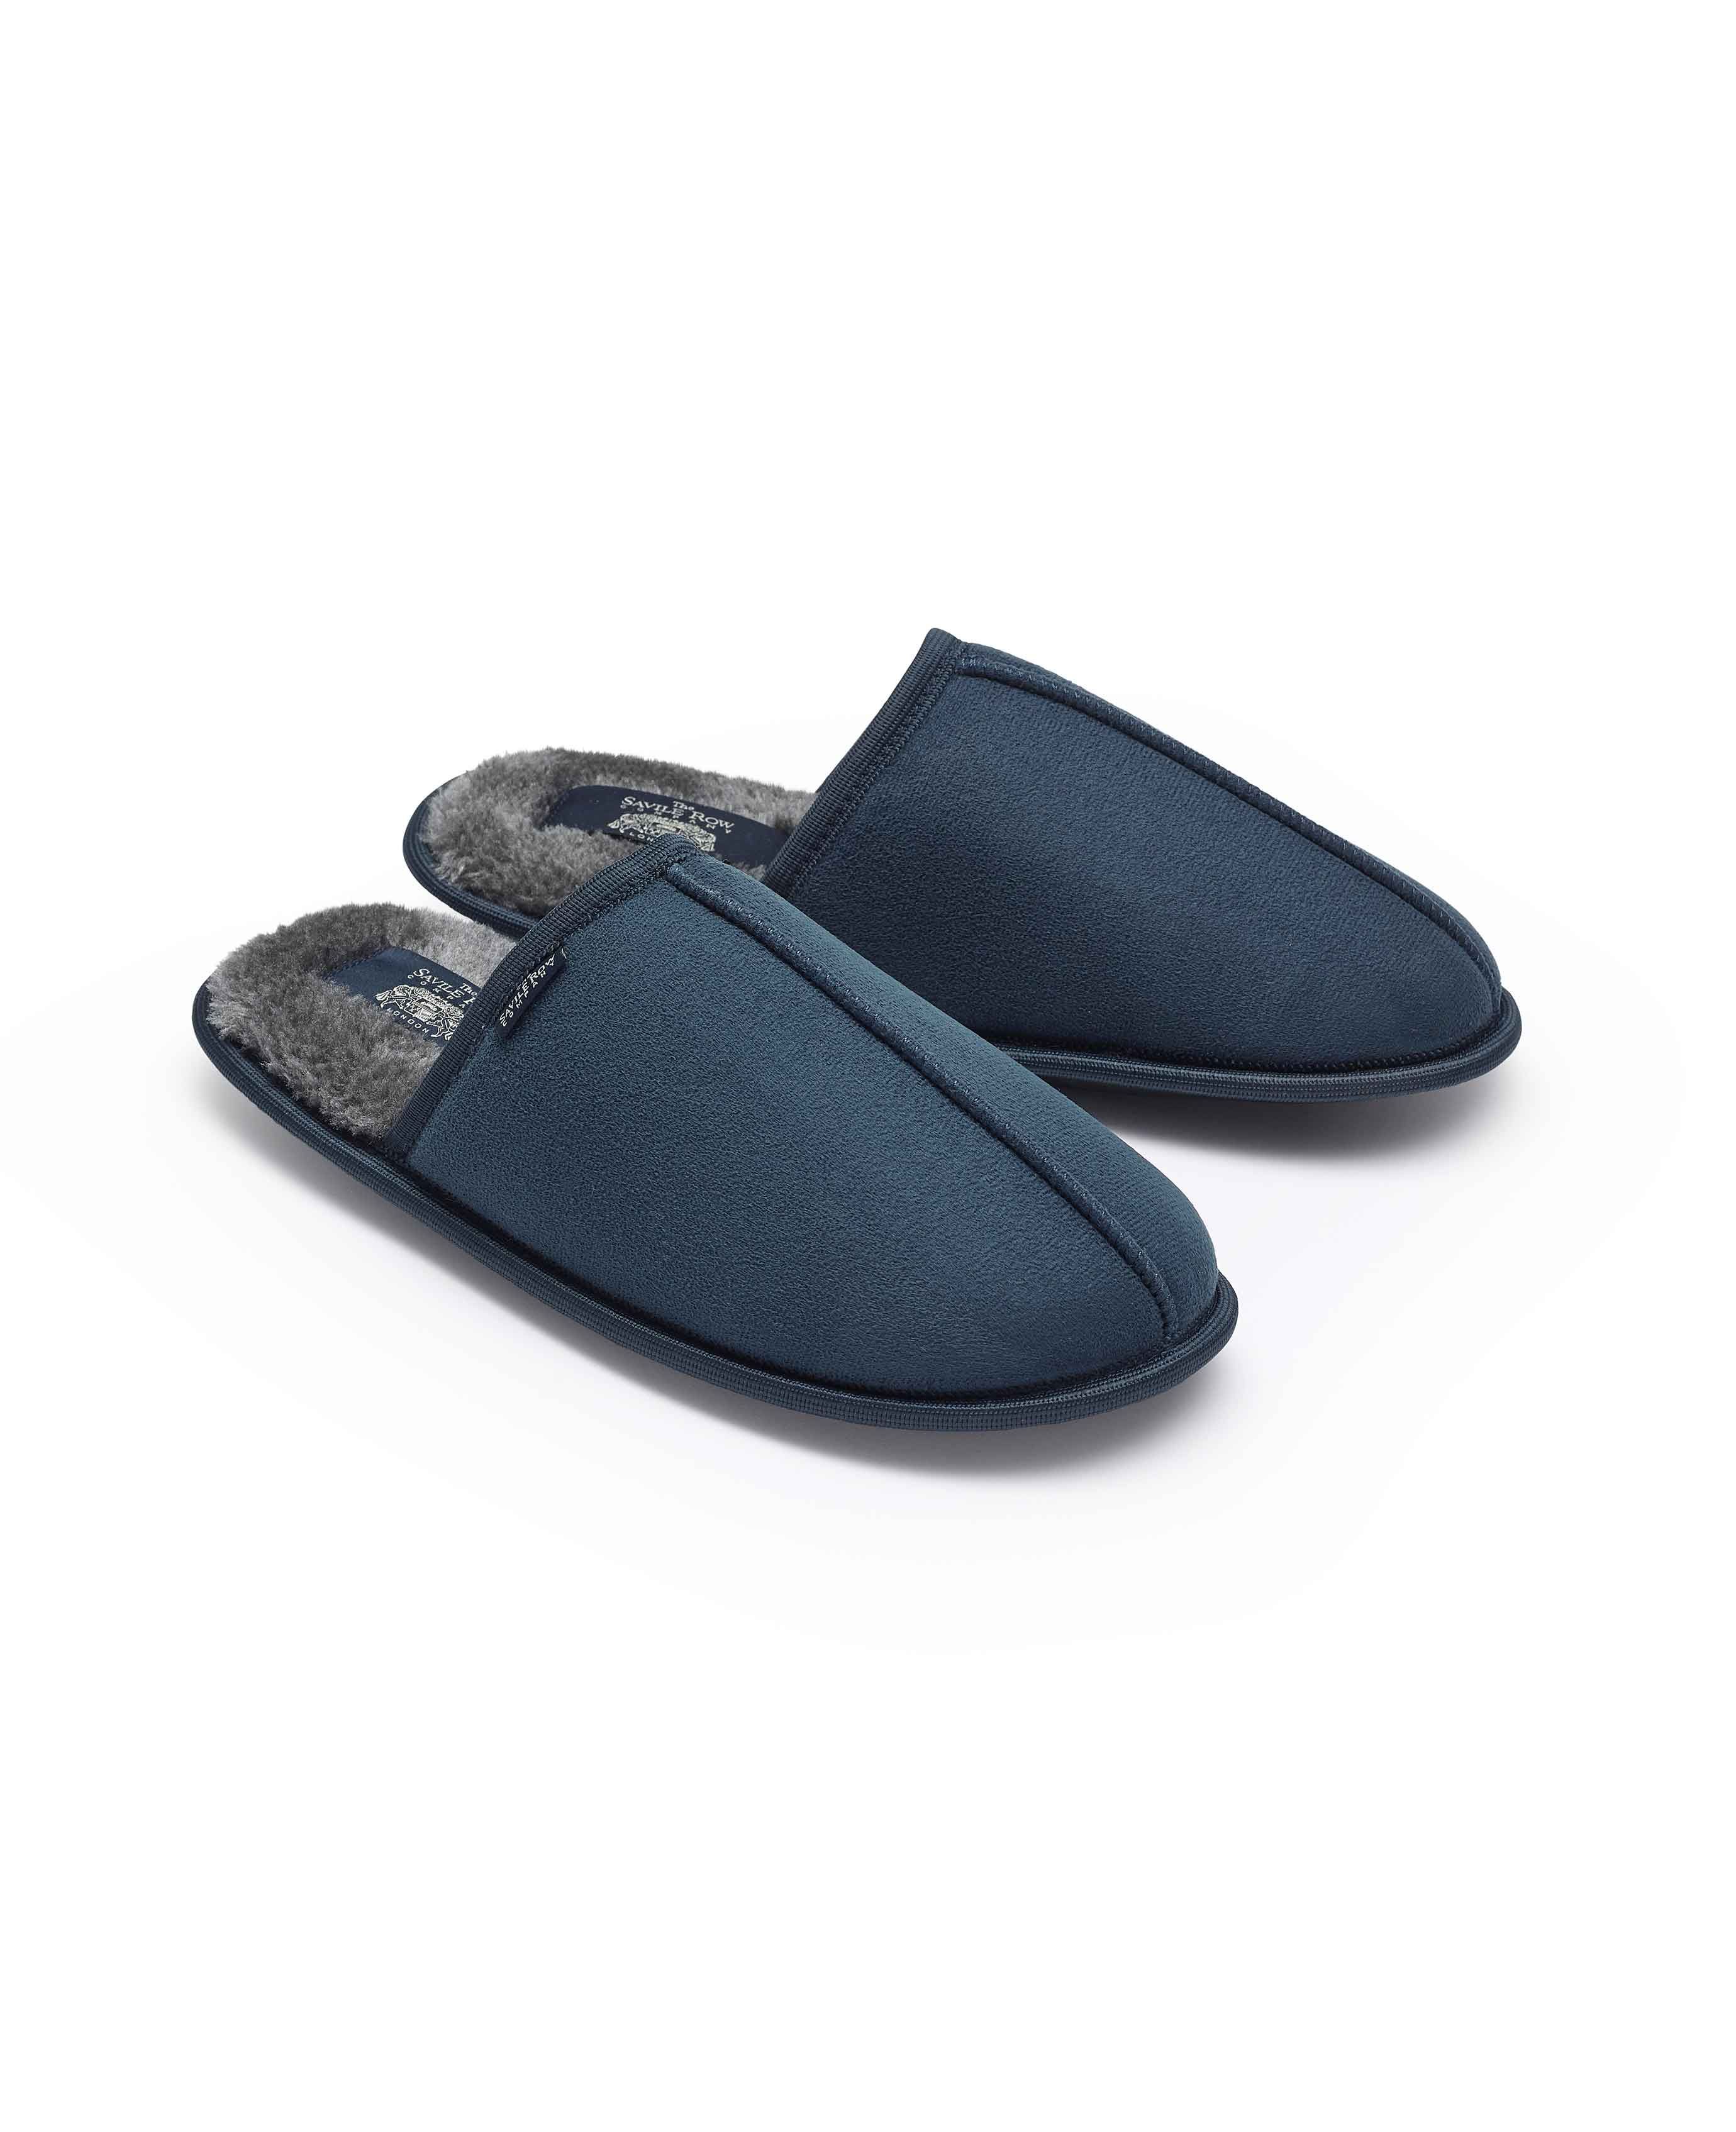 Mens Luxury Slippers Navy Blue UK Size 7 Rubber Sole Slip On Comfort NEW  TAGS | eBay